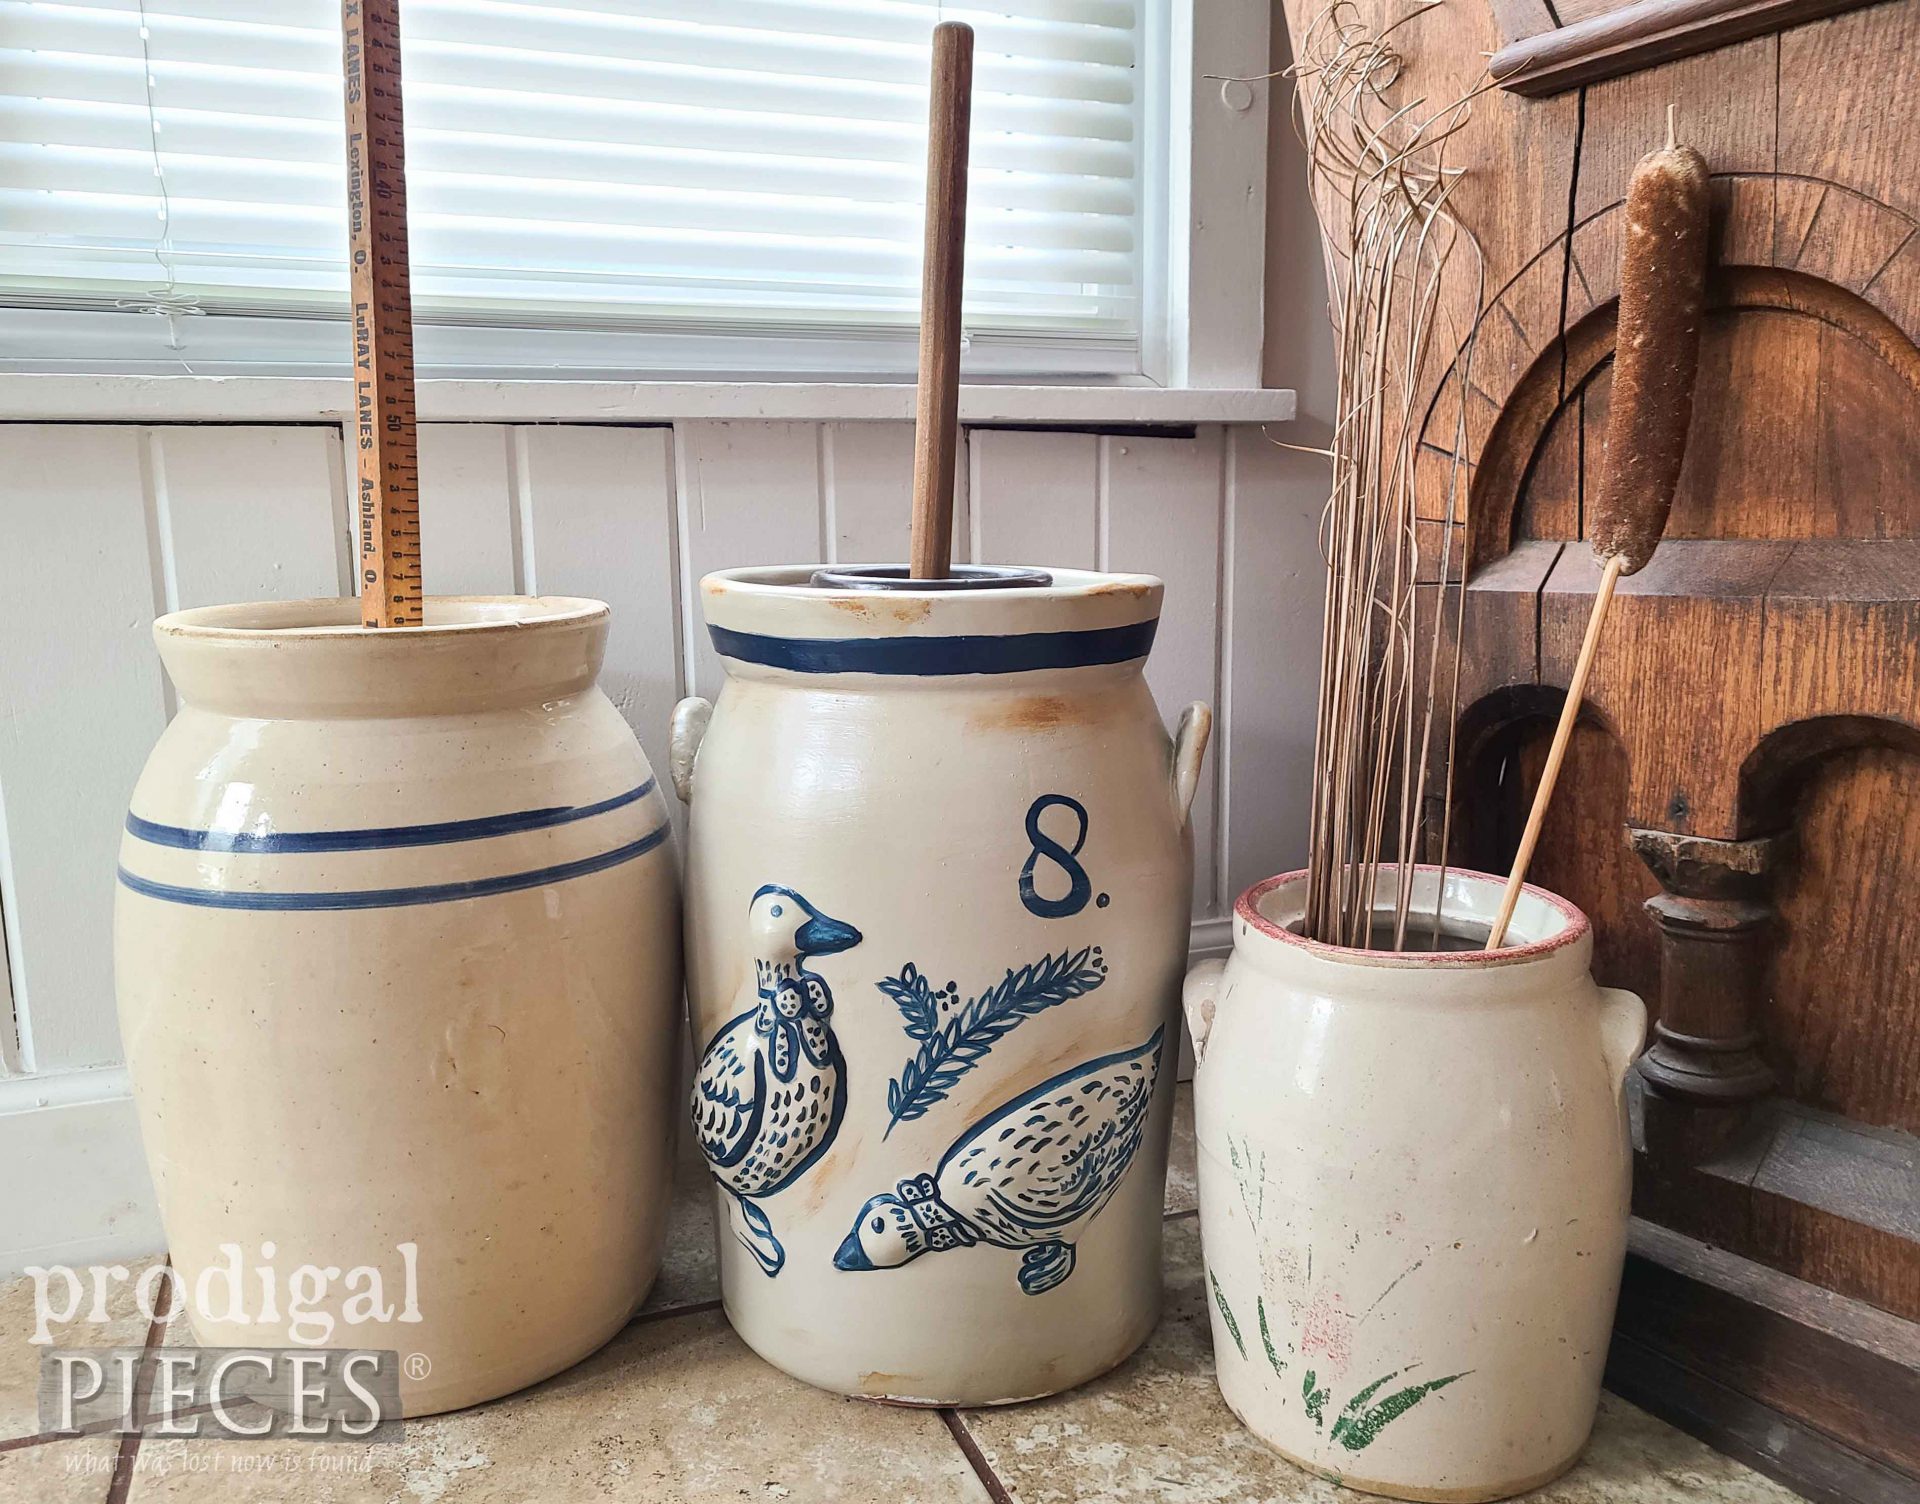 Hand-Painted Cermaic Butter Churn by Larissa of Prodigal Pieces | prodigalpieces.com #prodigalpieces #farmhouse #vintage #antique